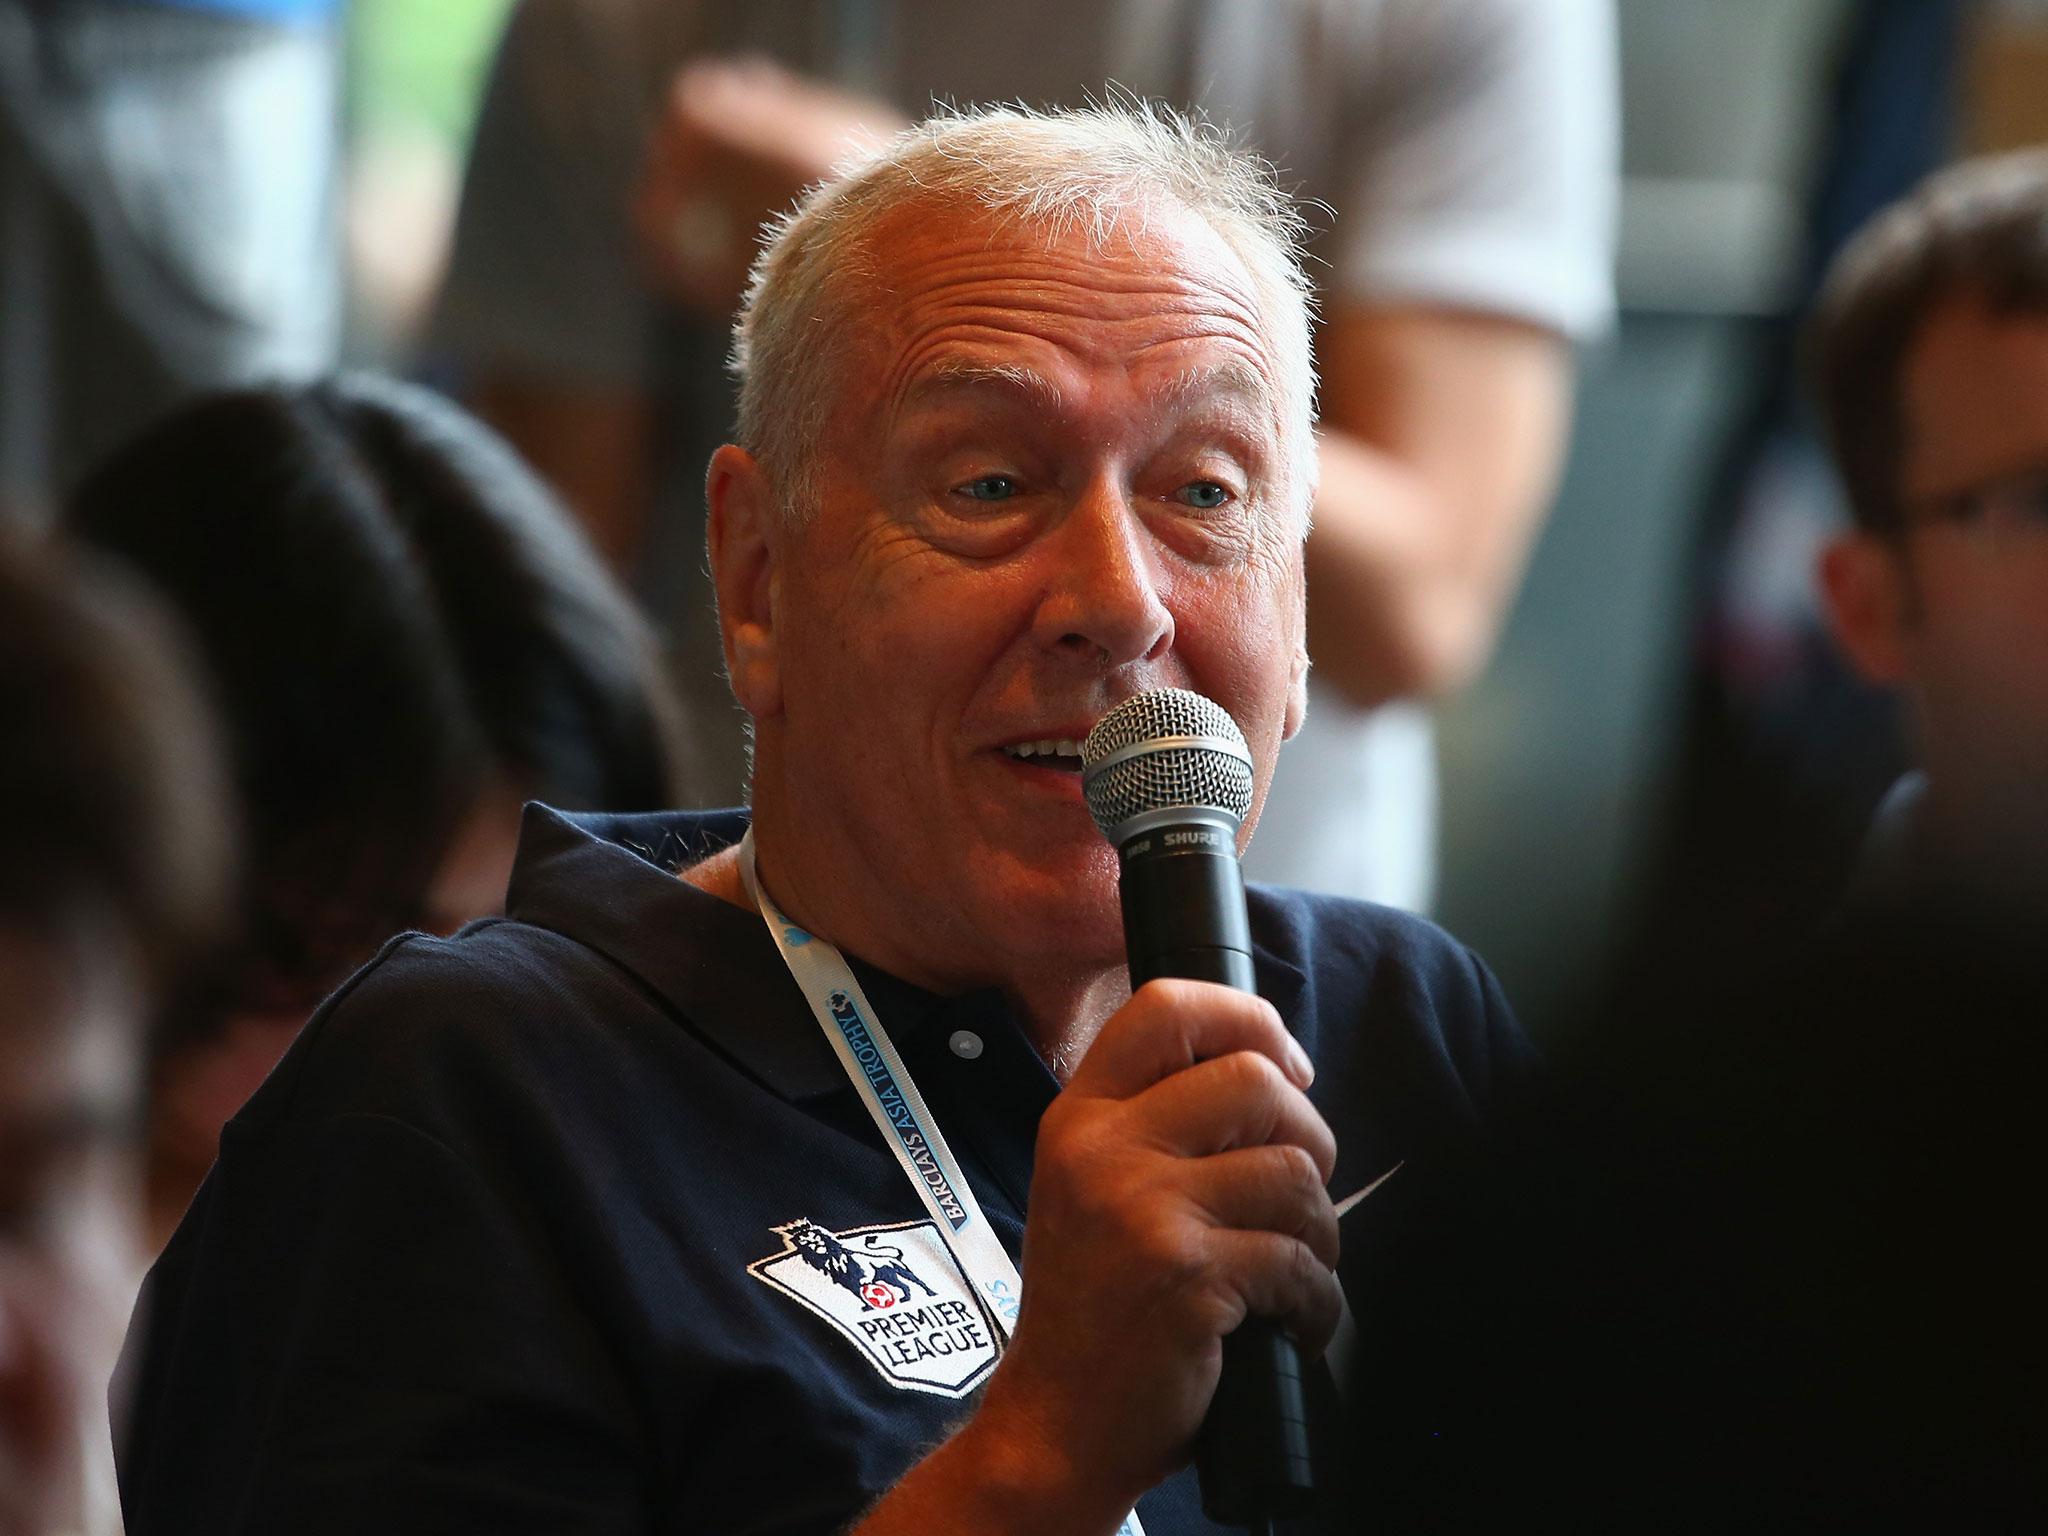 Martin Tyler has been the voice of the Premier League for the last 25 years